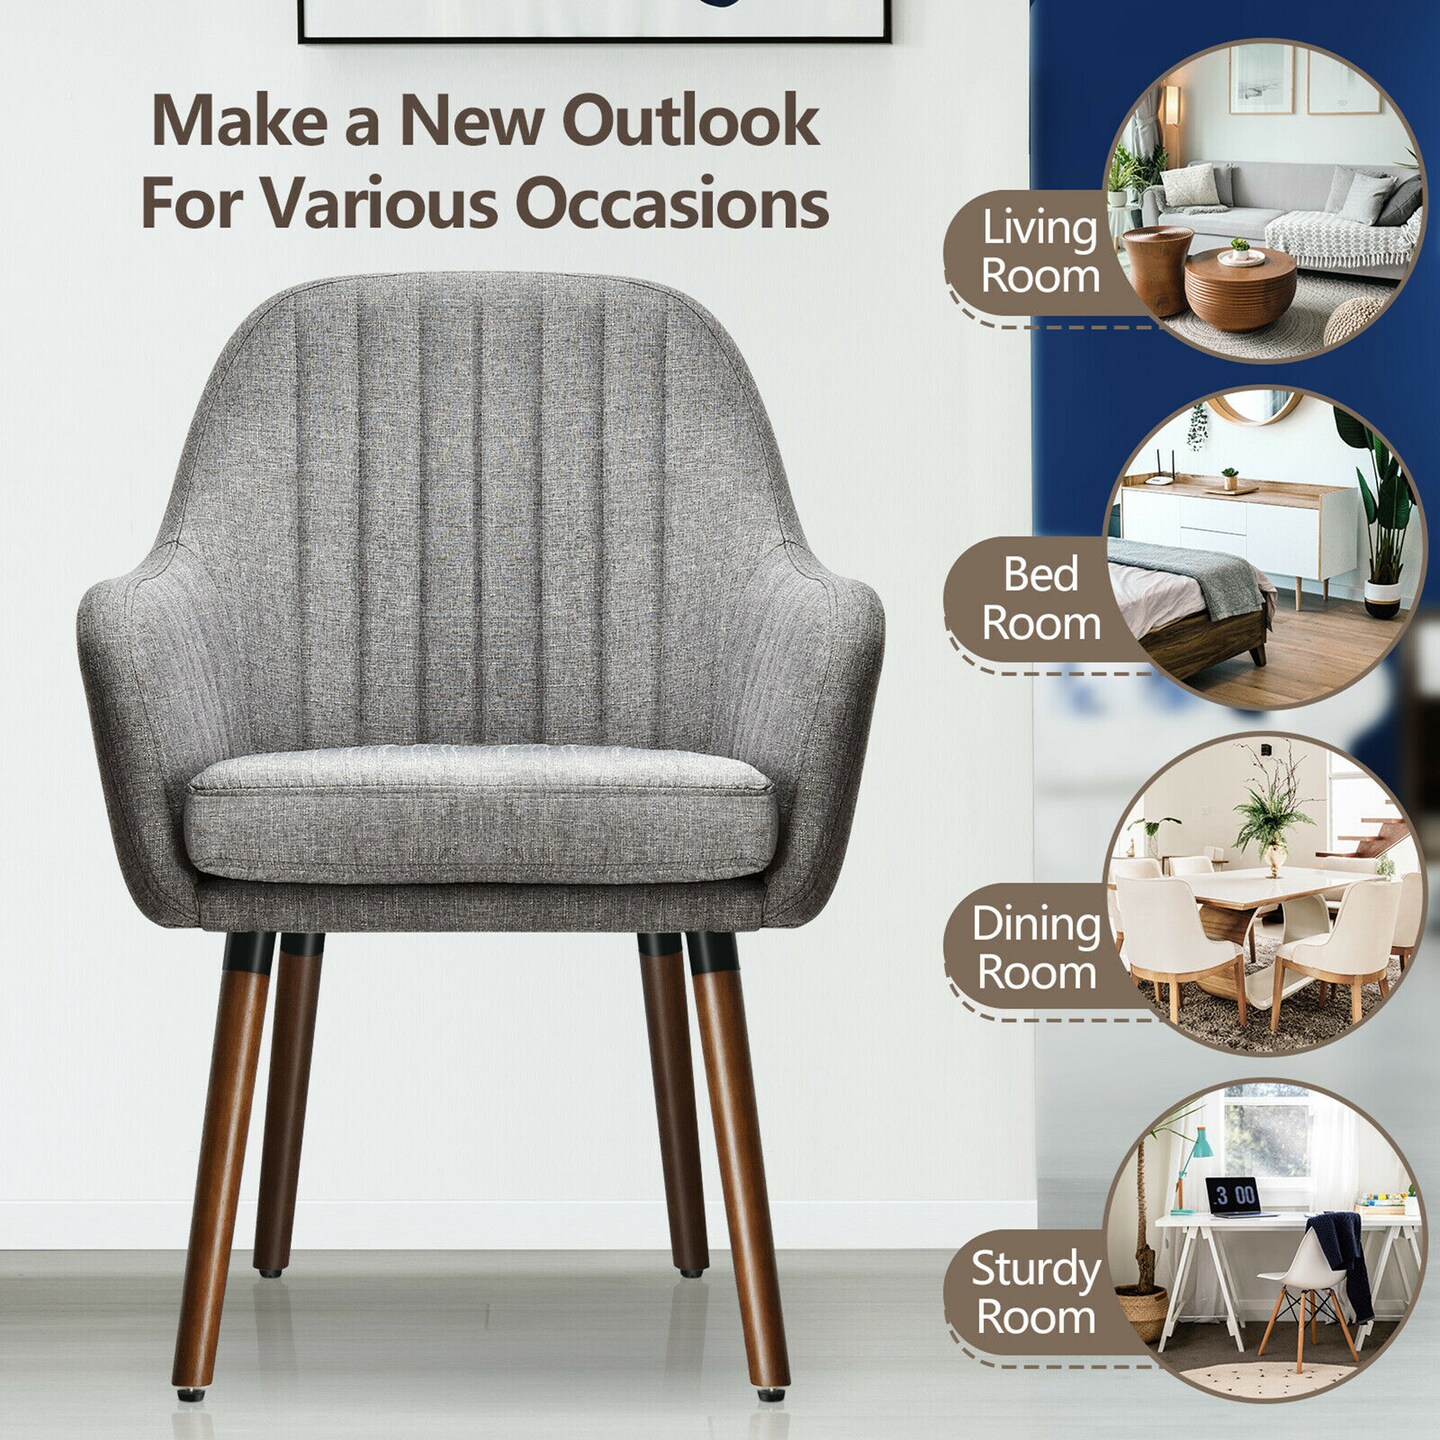 Costway Set of 4 Accent Chairs Fabric Upholstered Armchairs w/Wooden Legs Beige/Gray